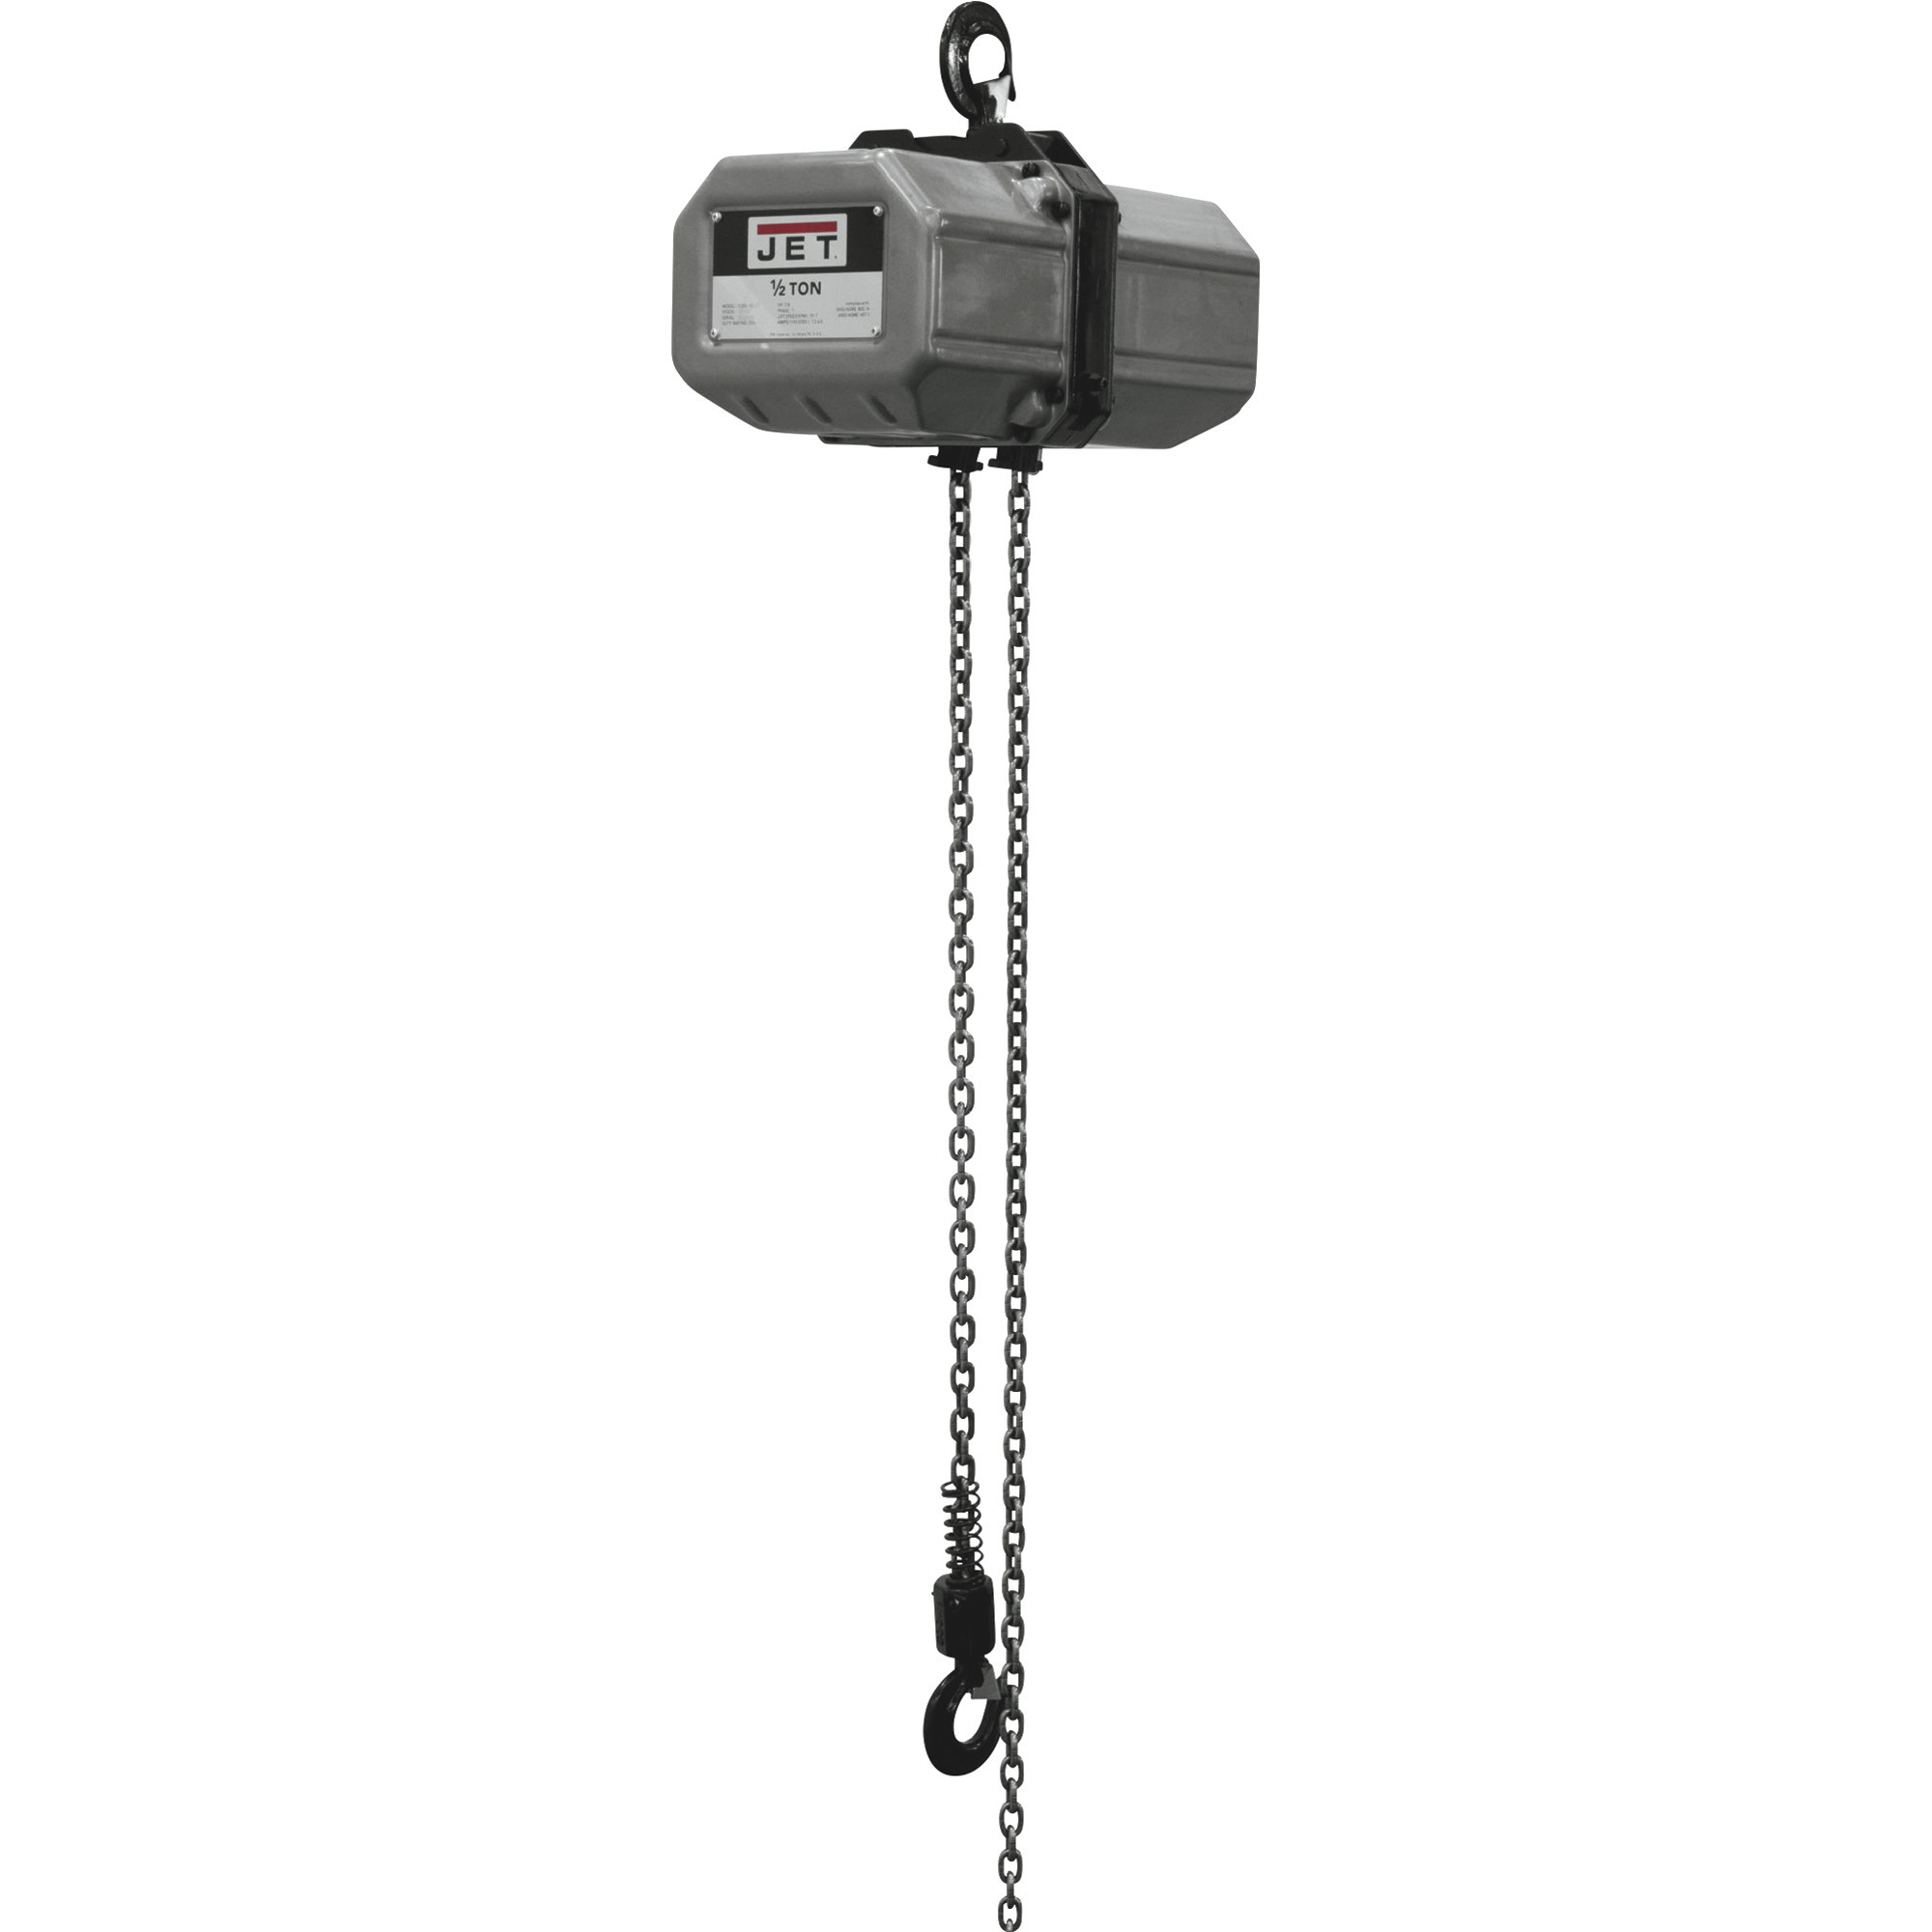 JET 2SS Series Electric Chain Hoist, 2-Ton Capacity, 15ft. Lift, 3-Phase, Model 2SS-3C-15